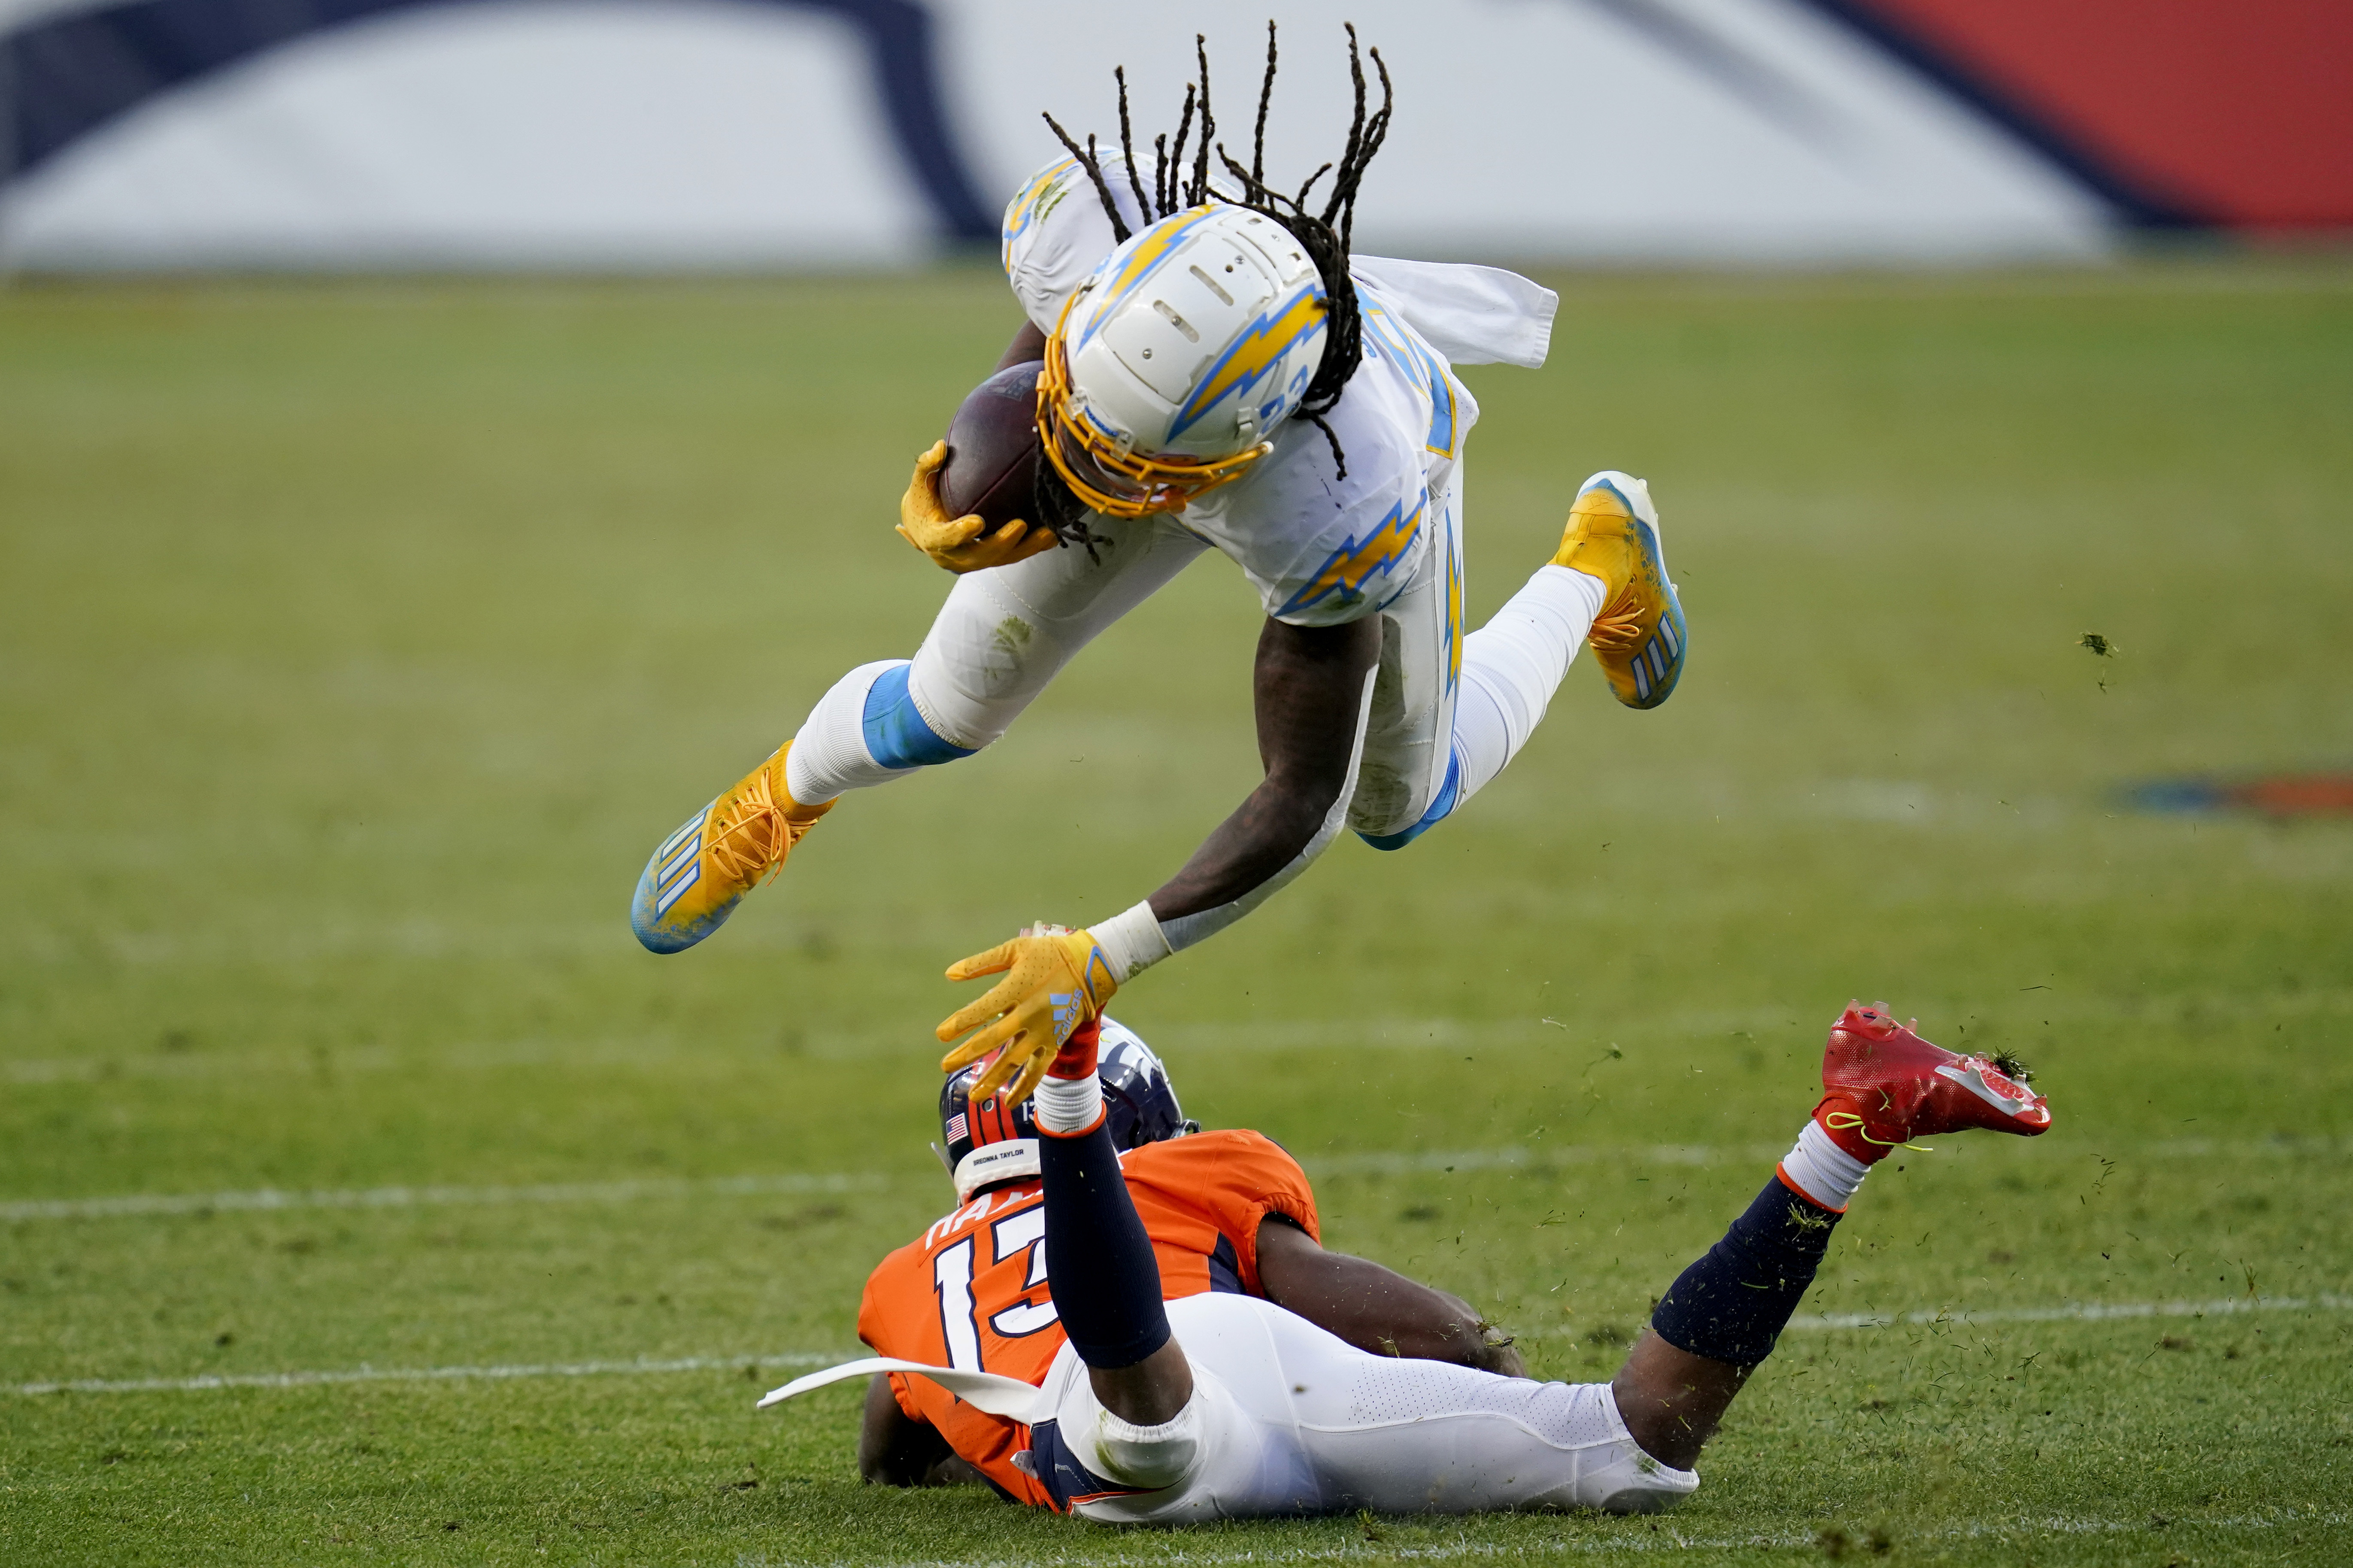 Lock rallies Broncos to last-second 31-30 win over Chargers